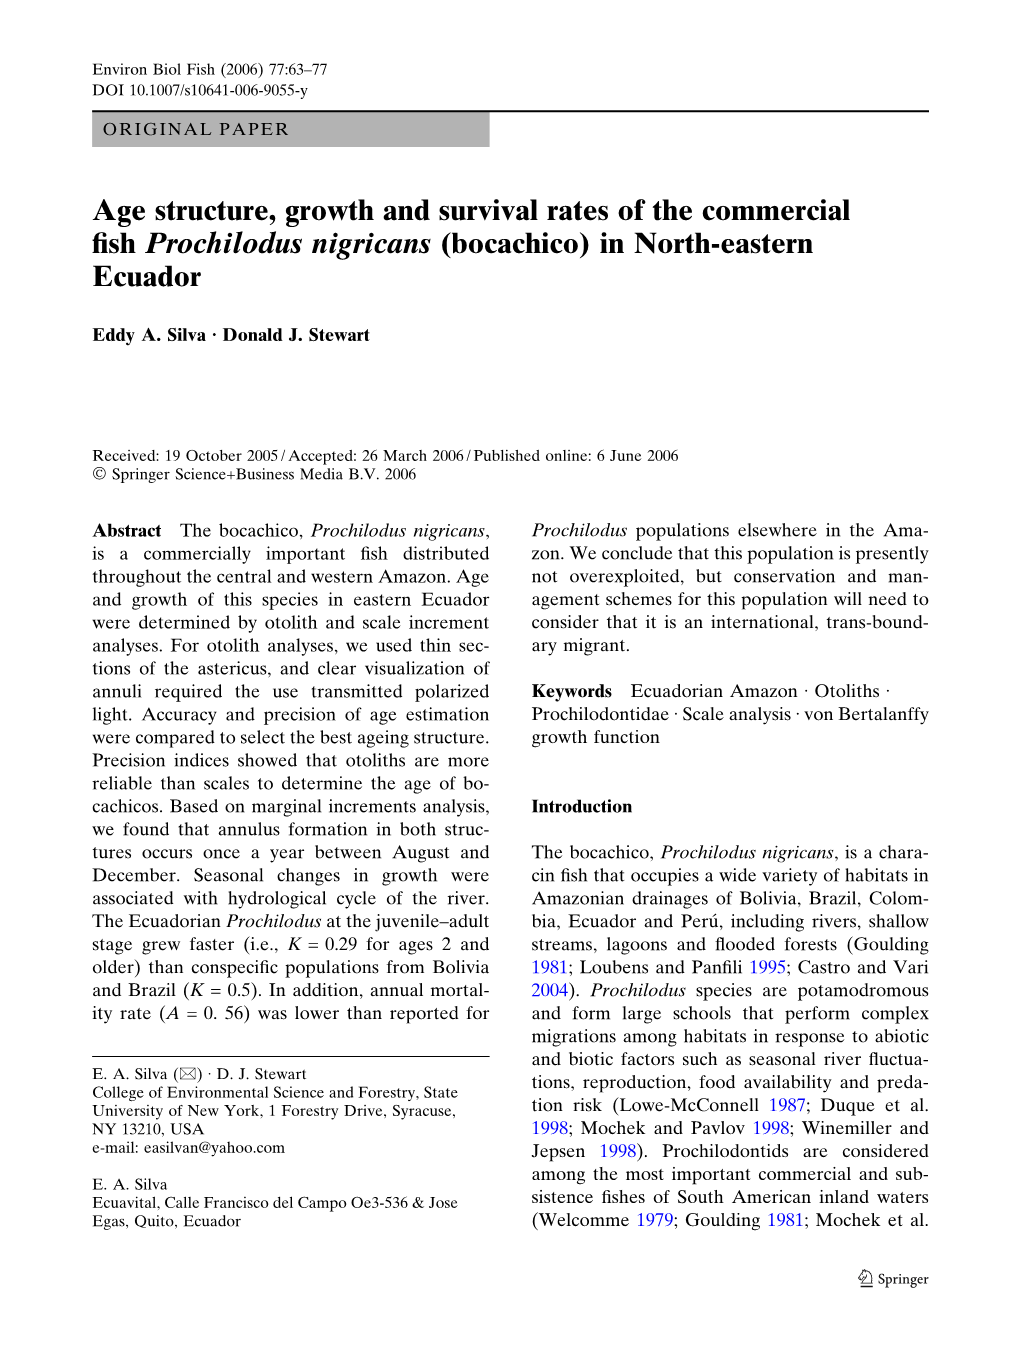 Age Structure, Growth and Survival Rates of the Commercial Fish Prochilodus Nigricans (Bocachico) in North-Eastern Ecuador